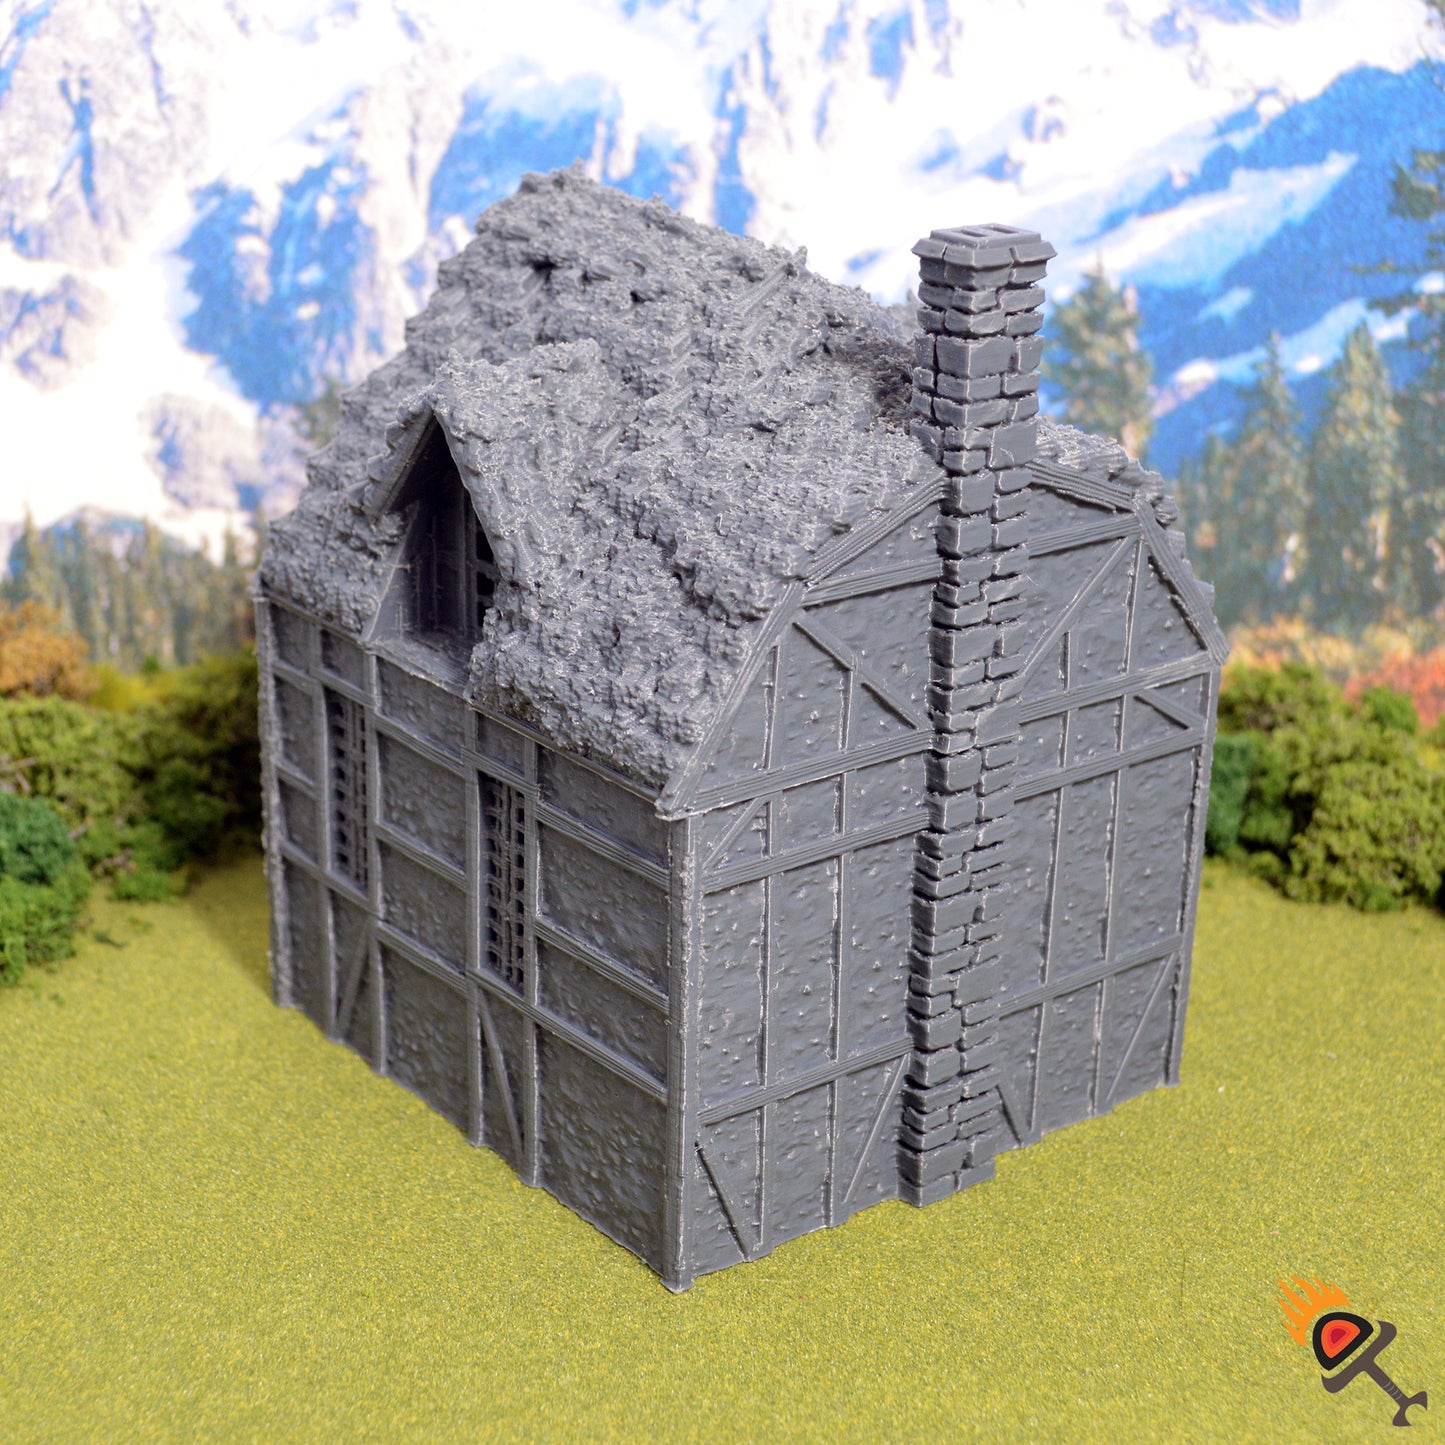 Wattle and Daub Barlyway Cottage 15mm 28mm 32mm for D&D Terrain, DnD Pathfinder Medieval Village, Printable Scenery King and Country